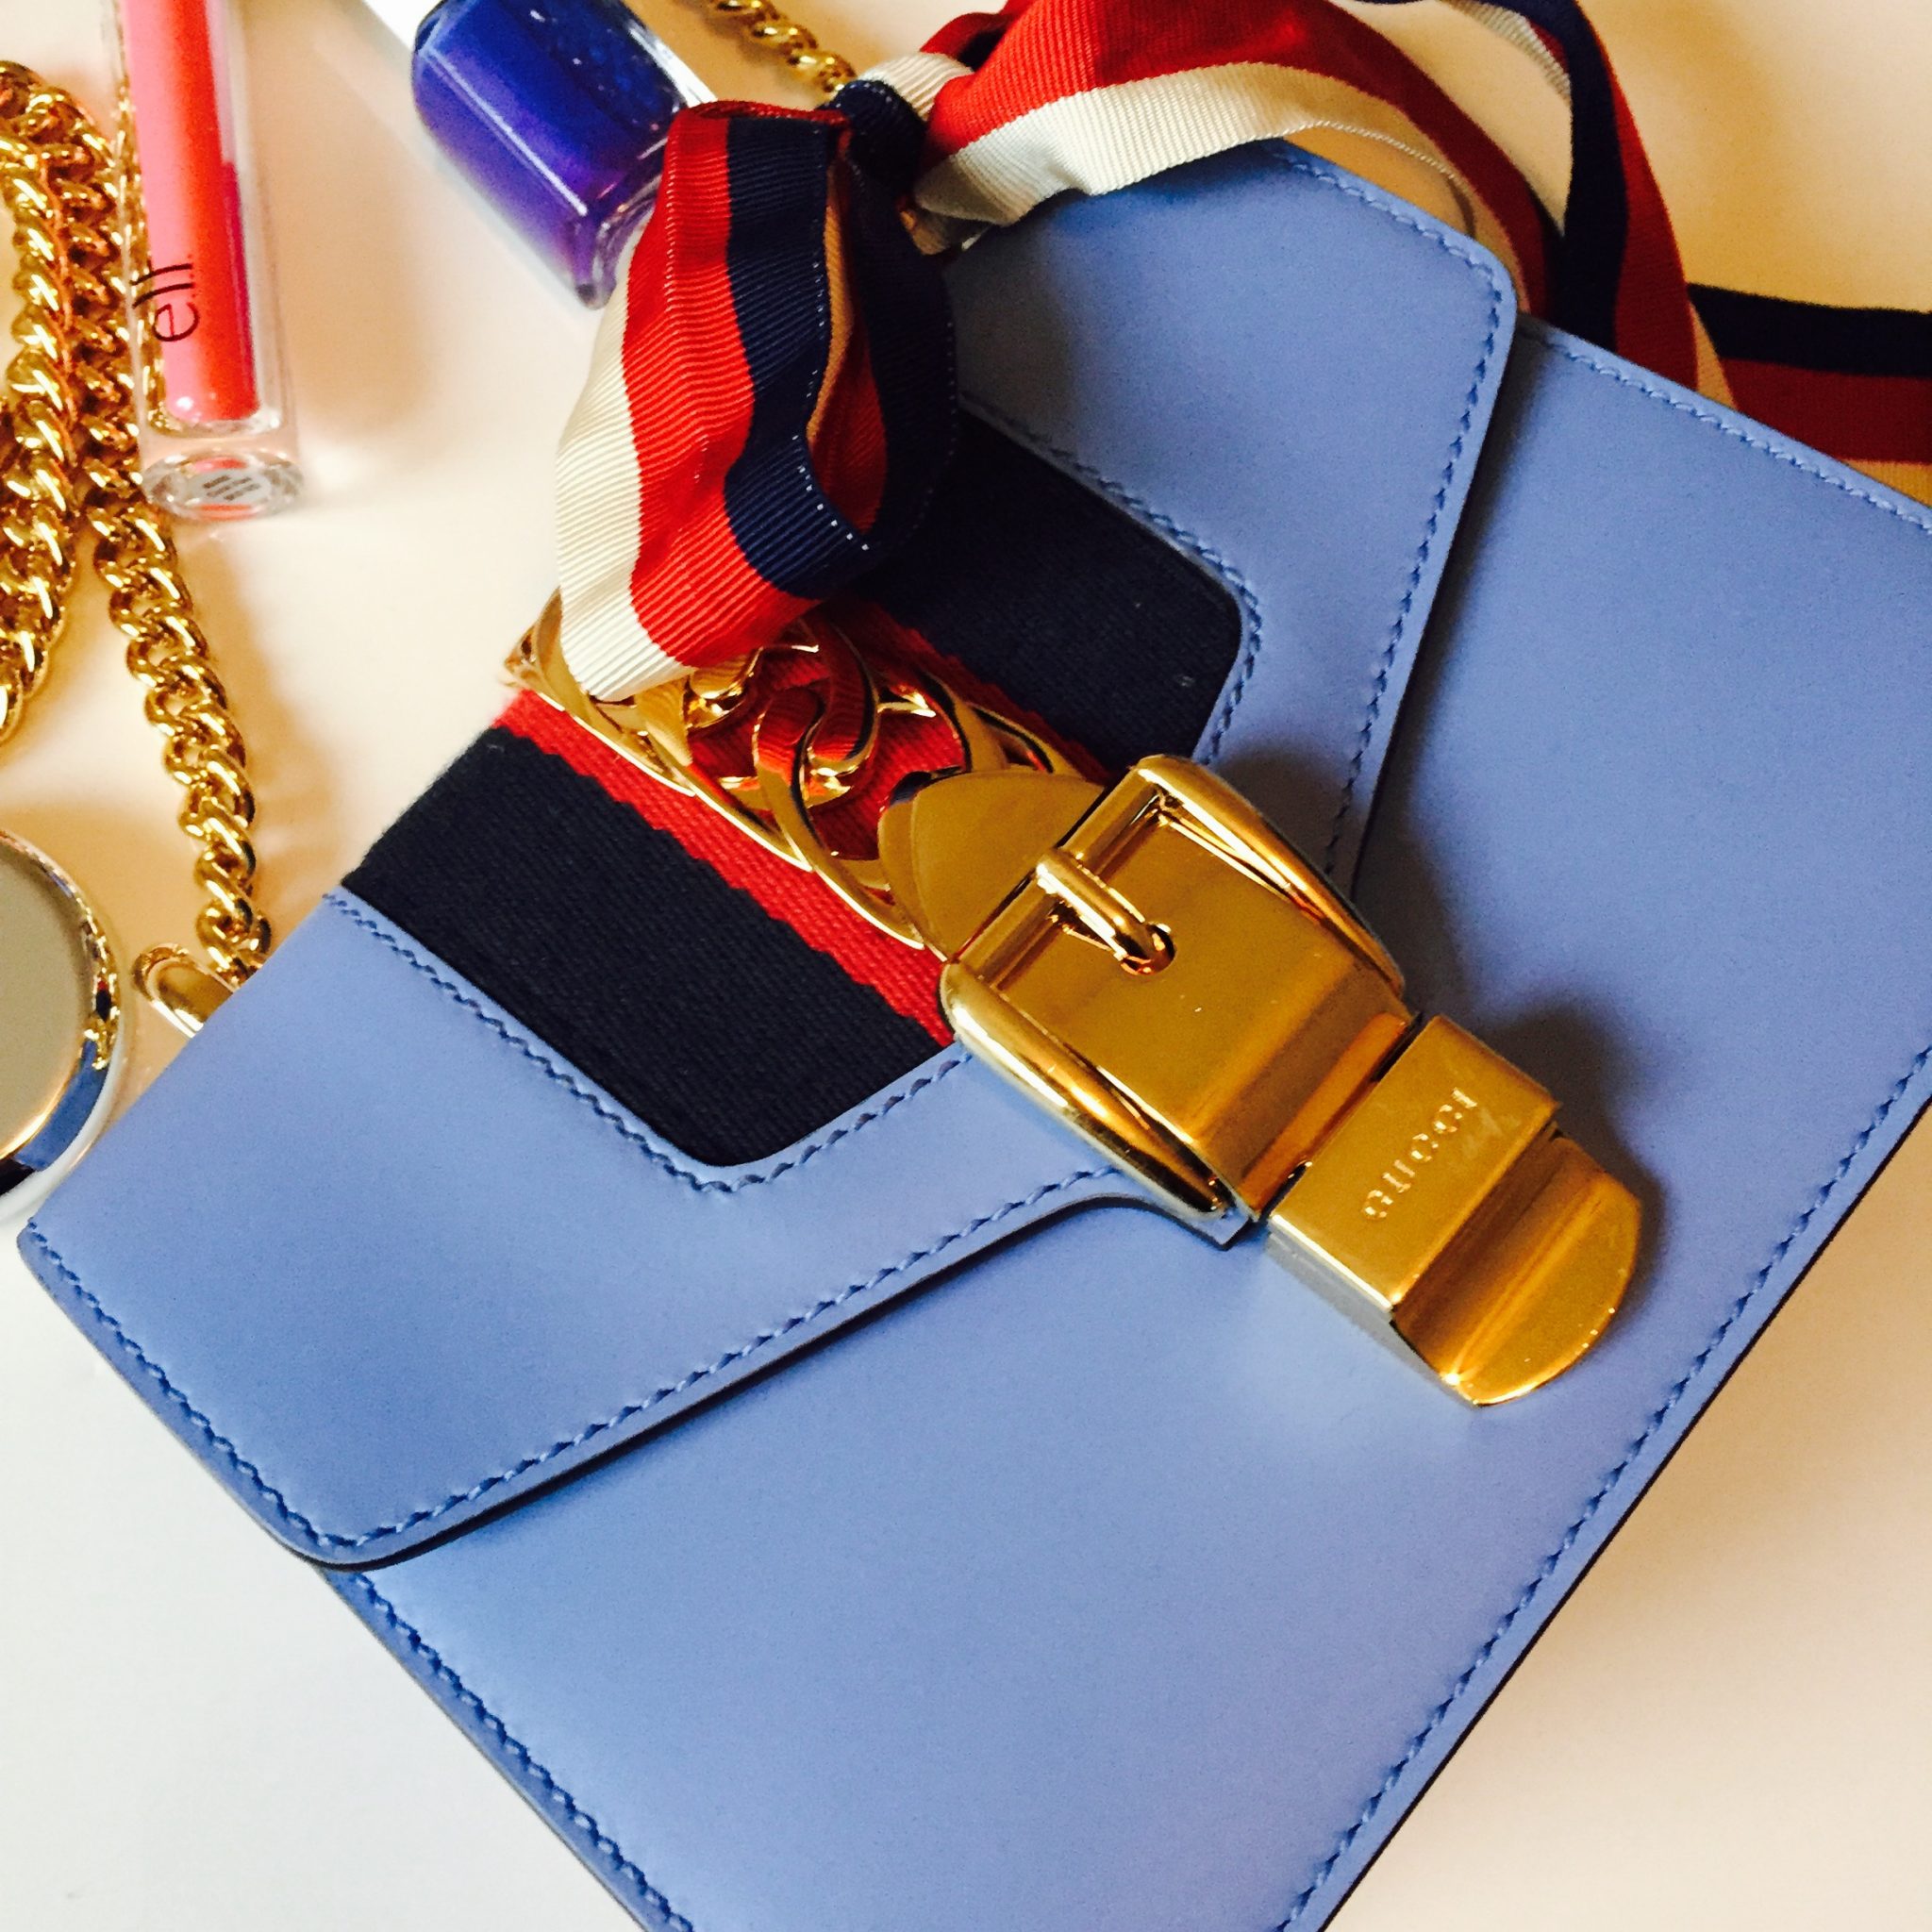 What’s In My Bag: Gucci Sylvie Leather Mini Bag